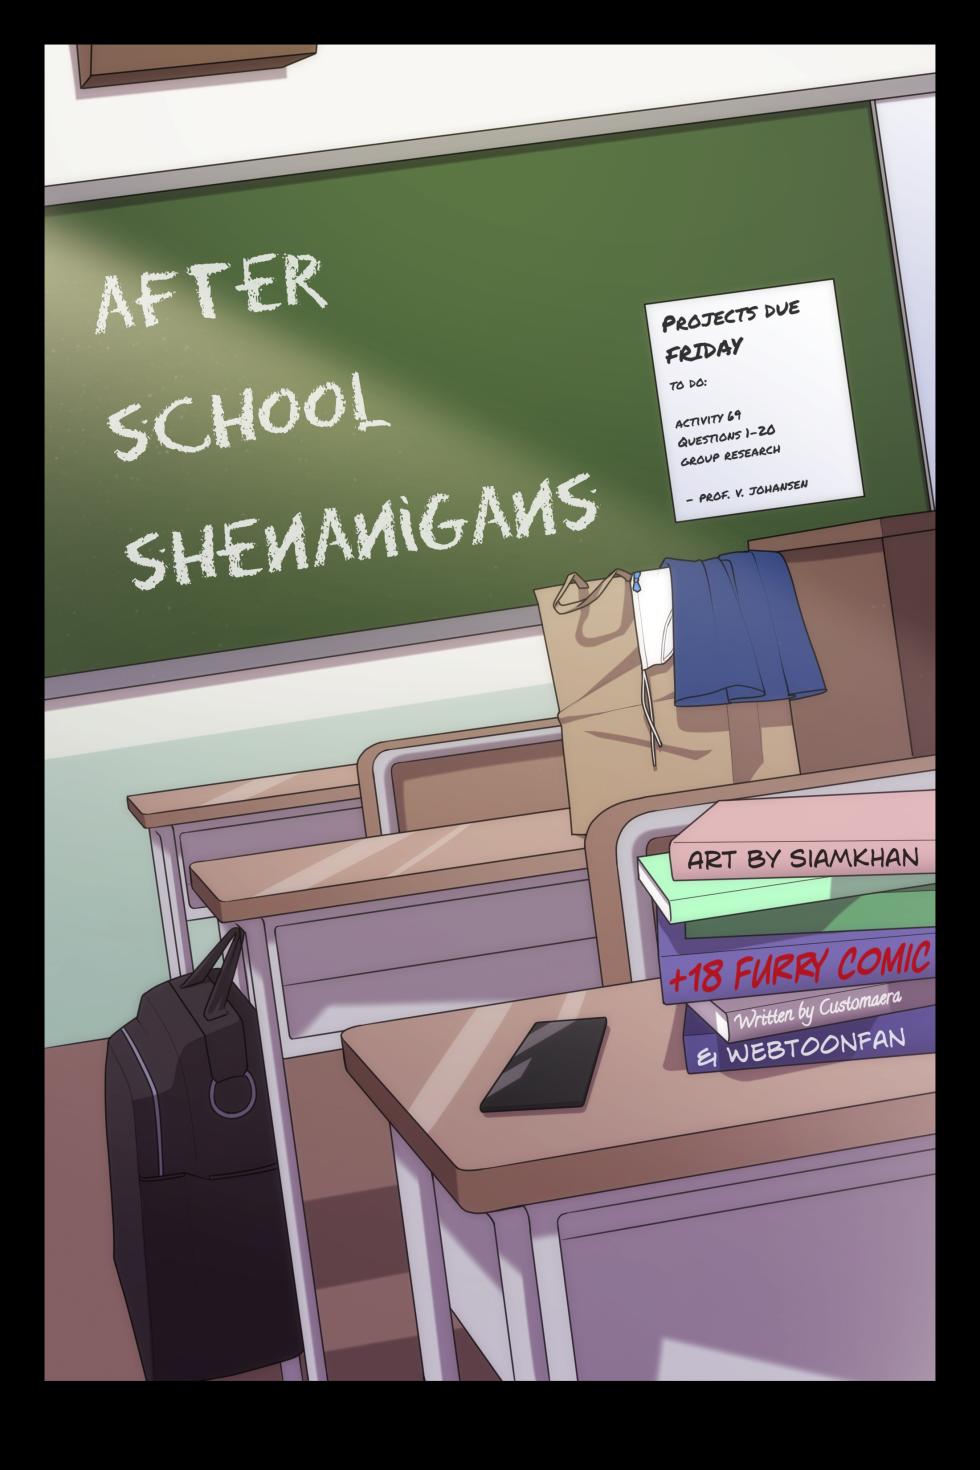 [SiamKhan] After School Shenanigans - Page 1